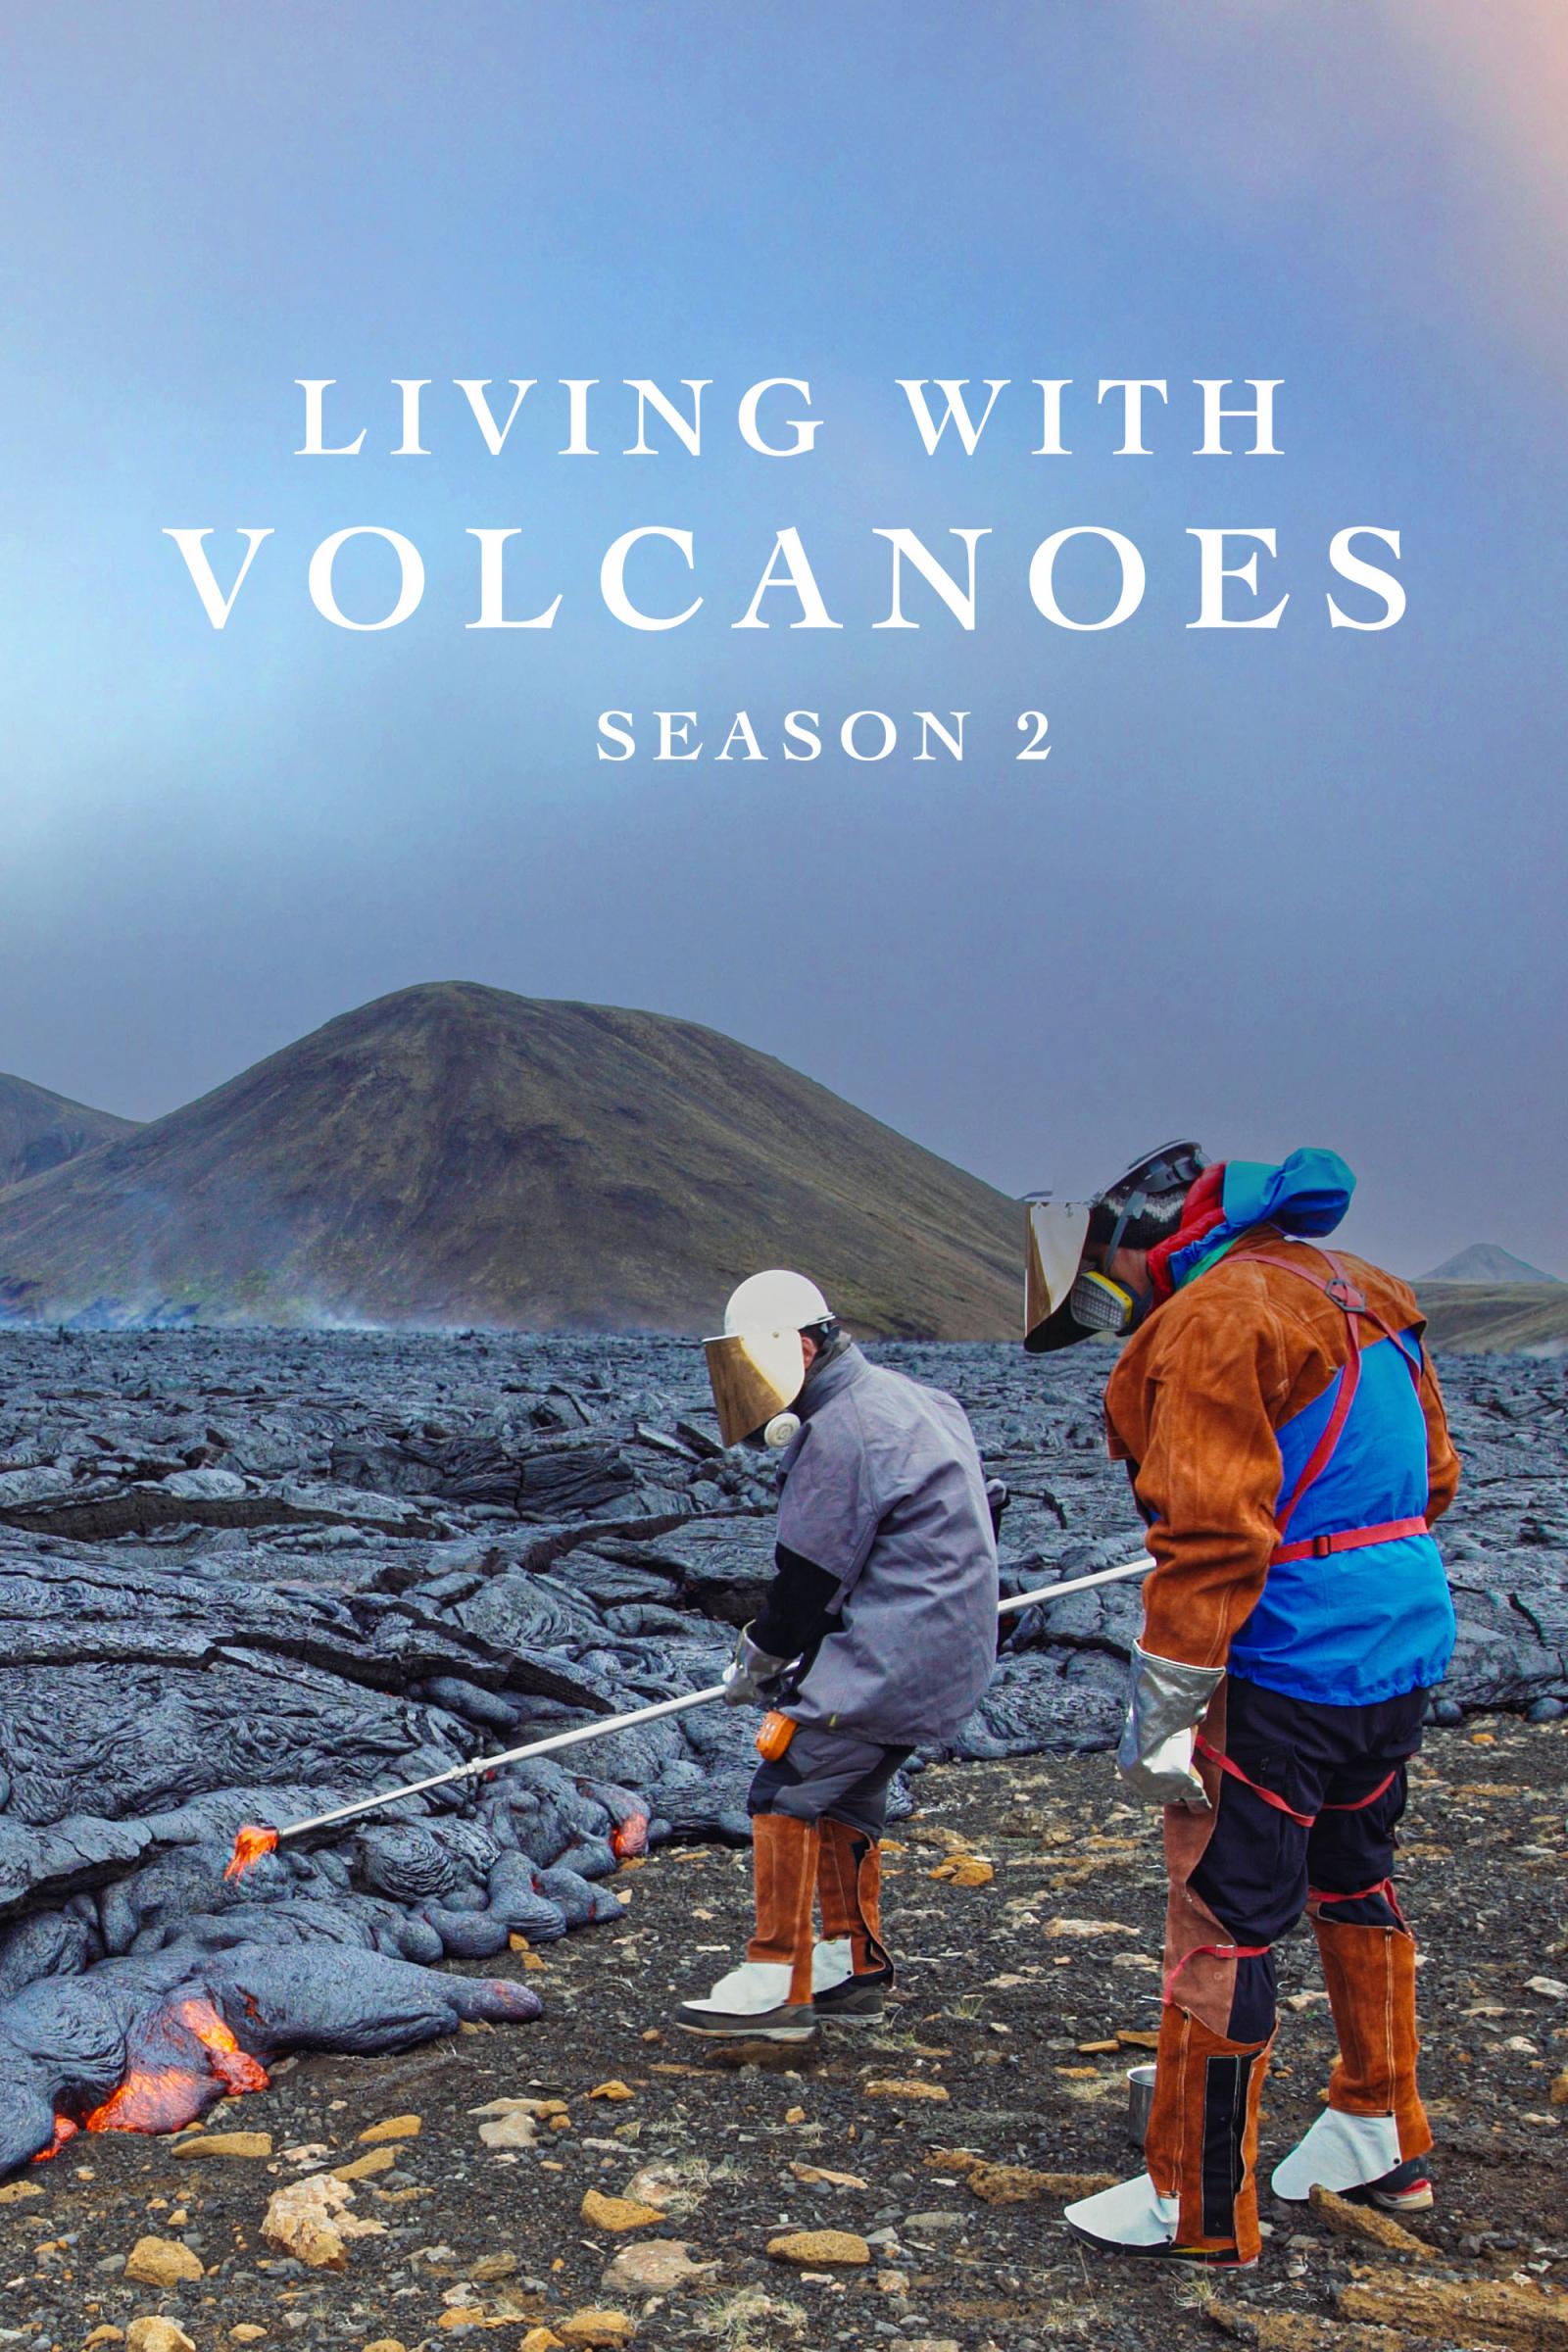 Where to stream Living with Volcanoes